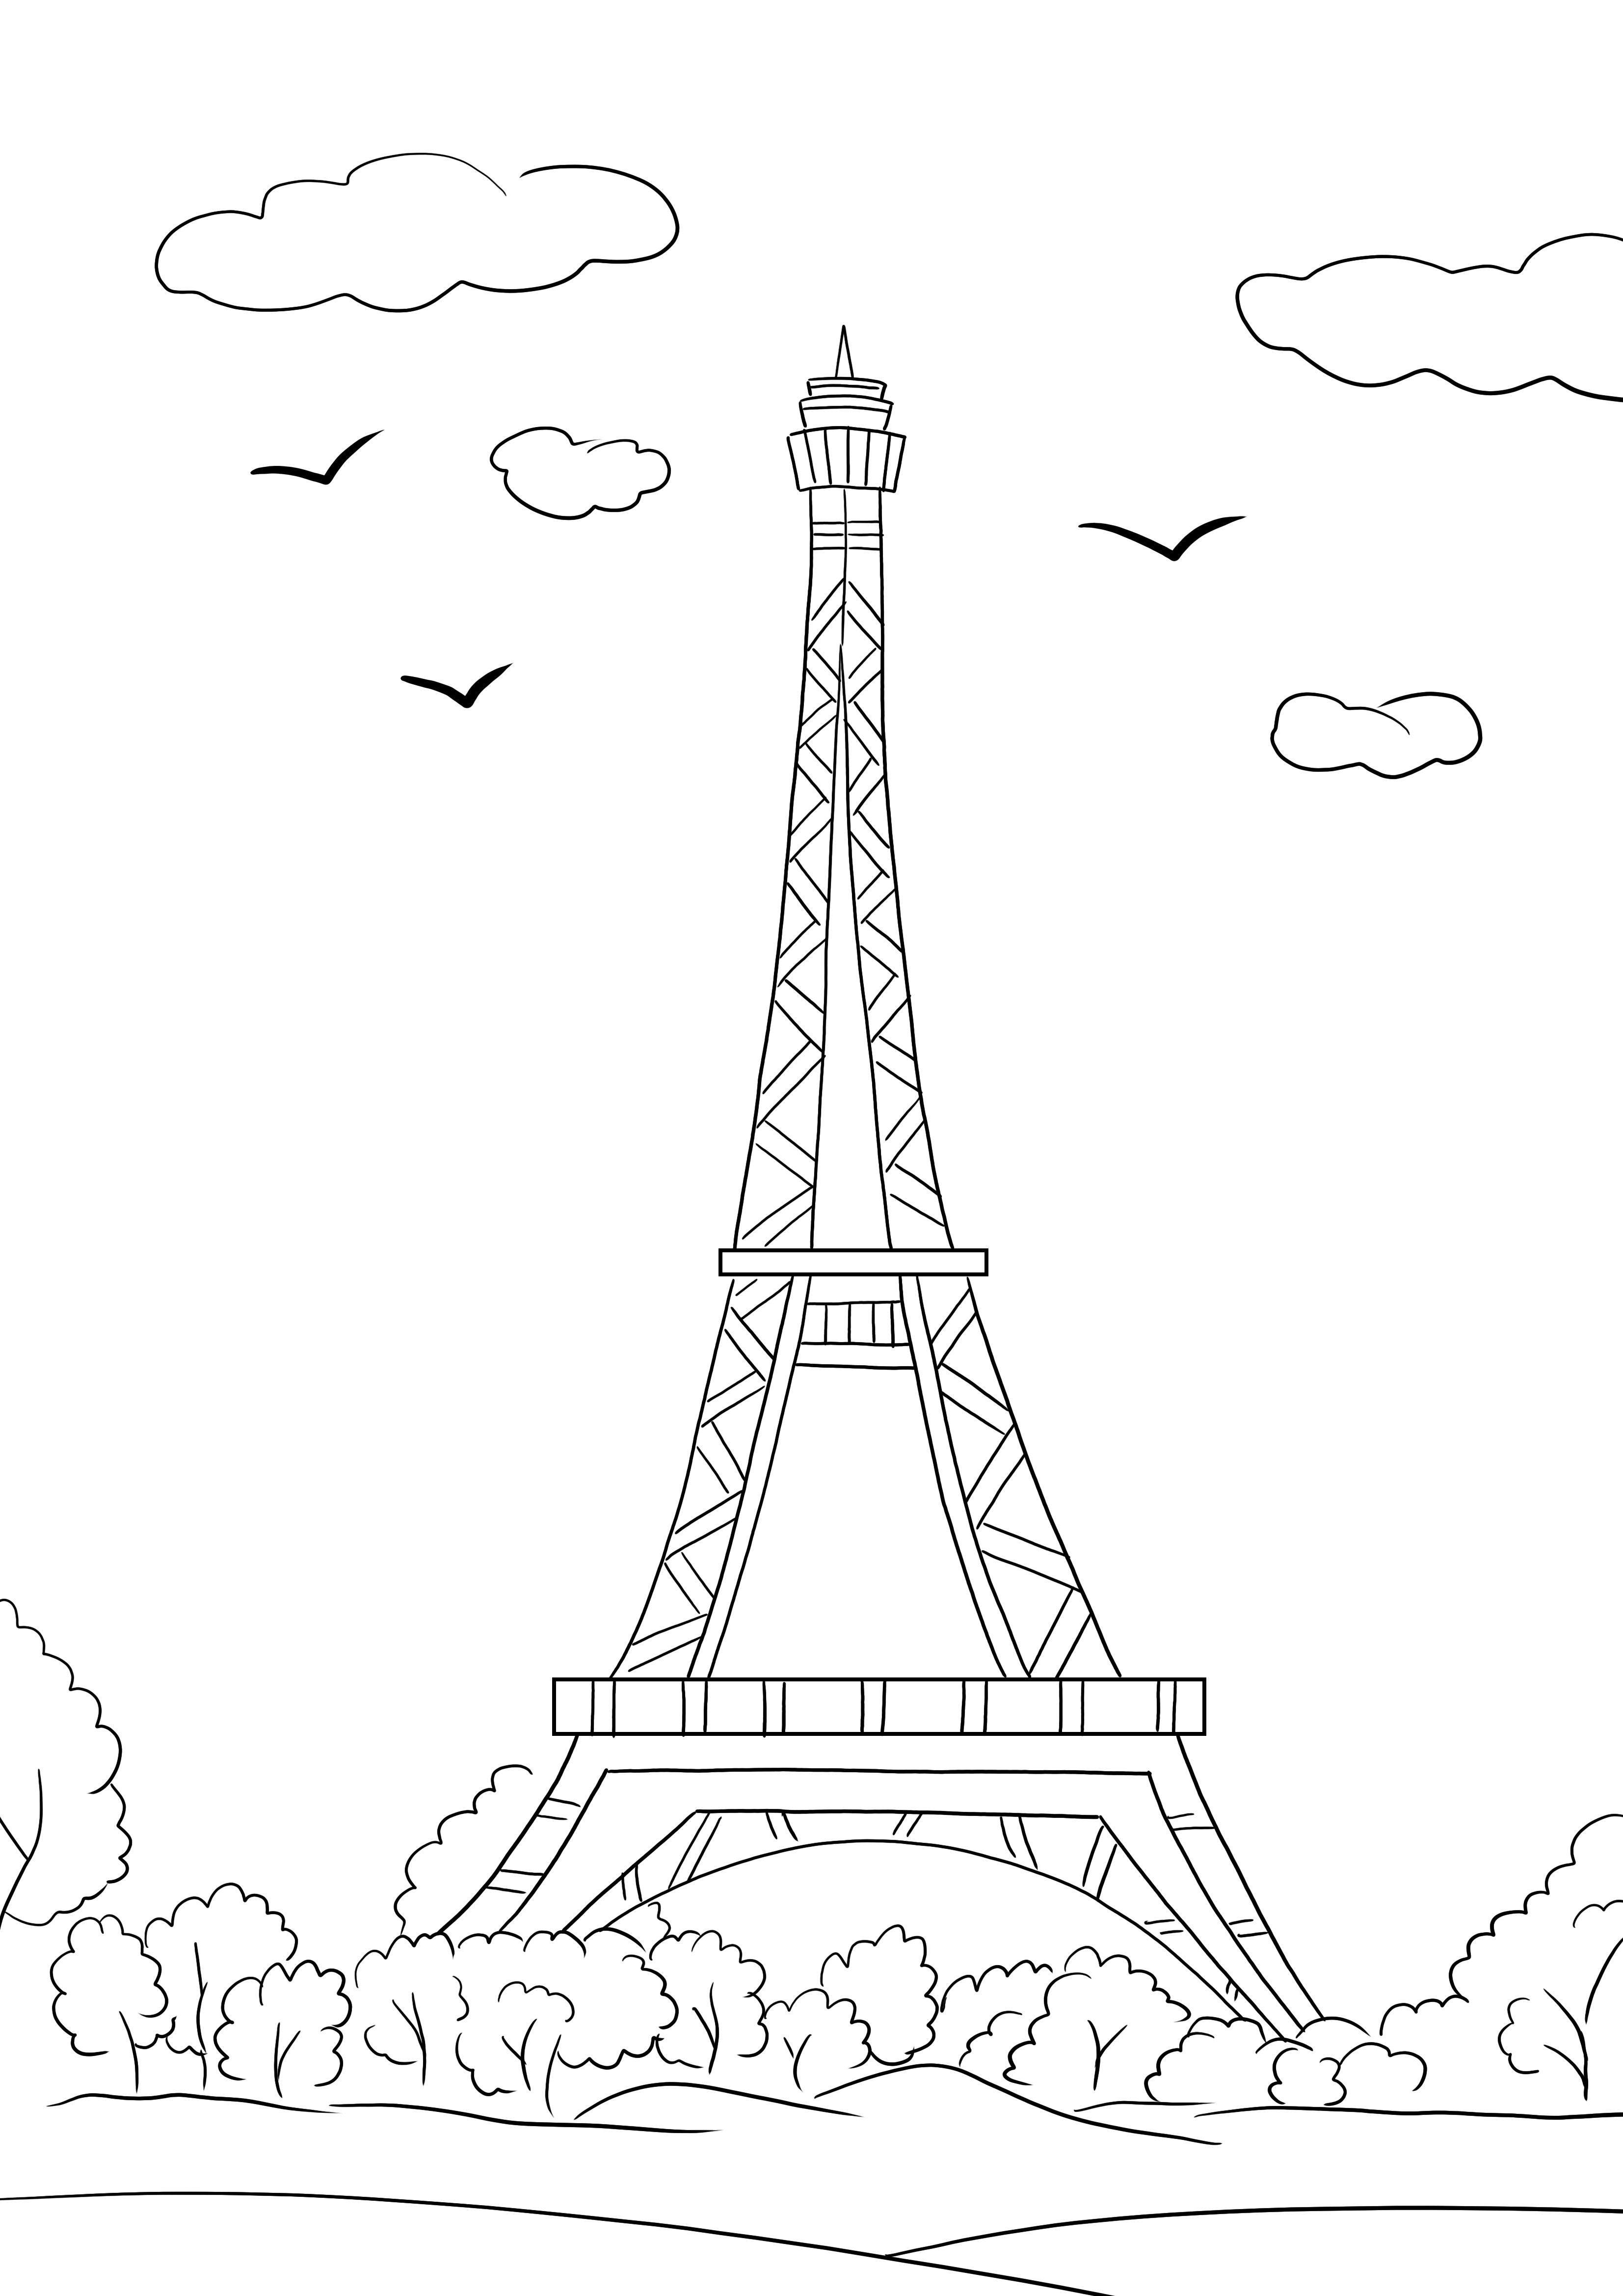 Eiffel Tower free to print and color page to learn more about famous monuments